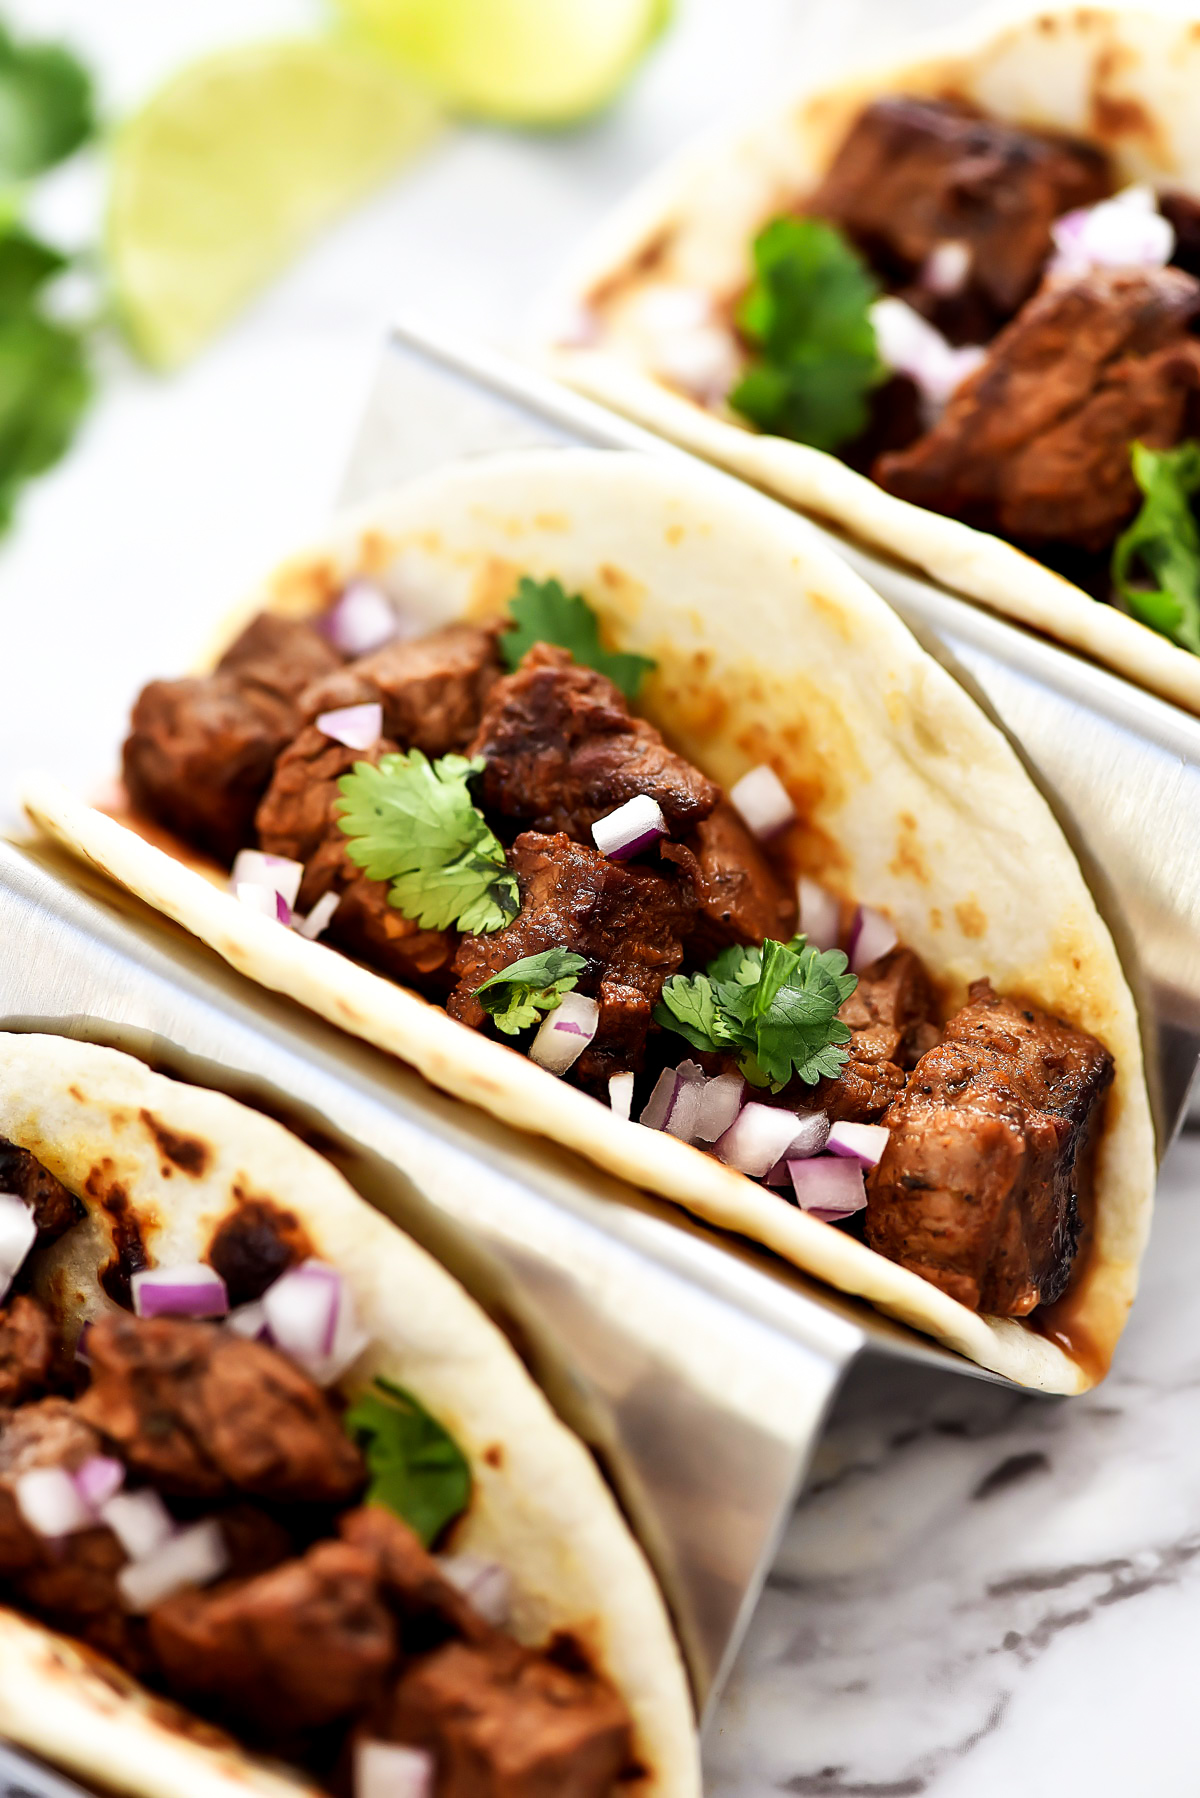 Mexican Street Tacos are filled with carne asada, cilantro and red onion served in corn or flour tortillas. Life-in-the-Lofthouse.com